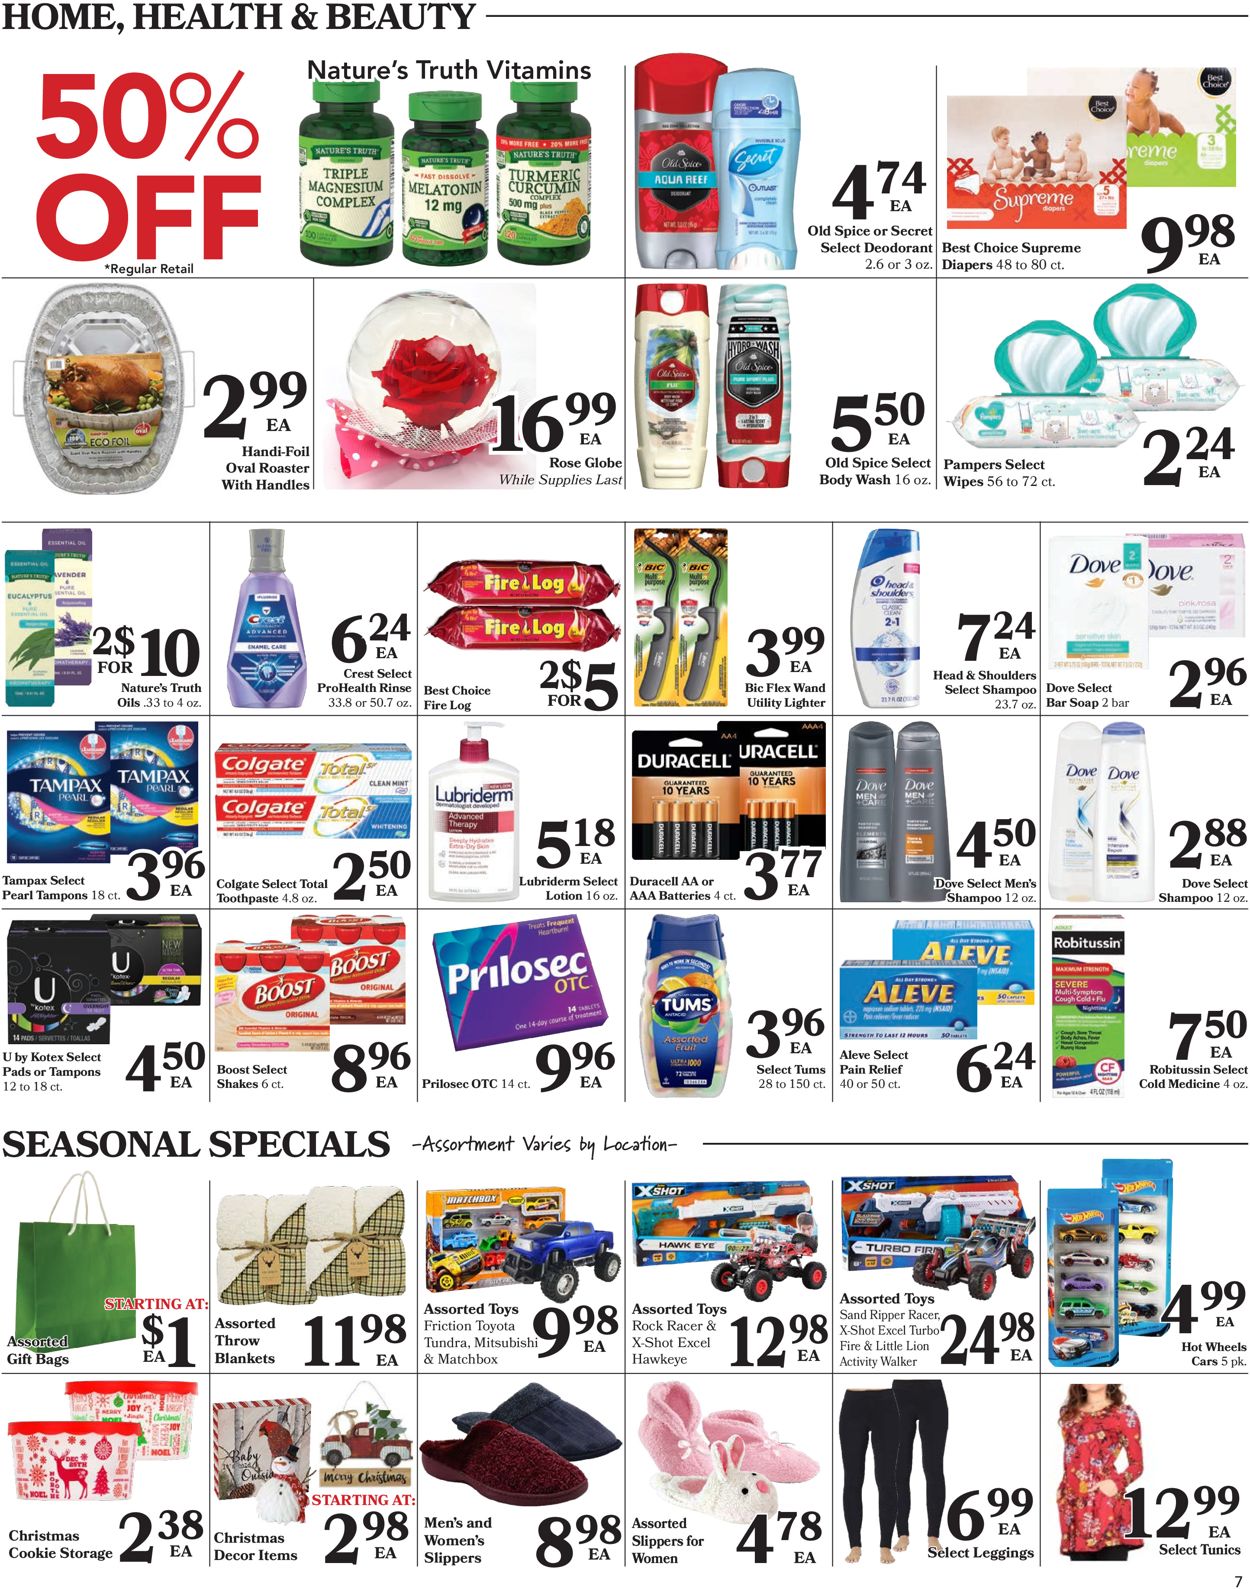 Catalogue Harps Foods from 12/02/2020